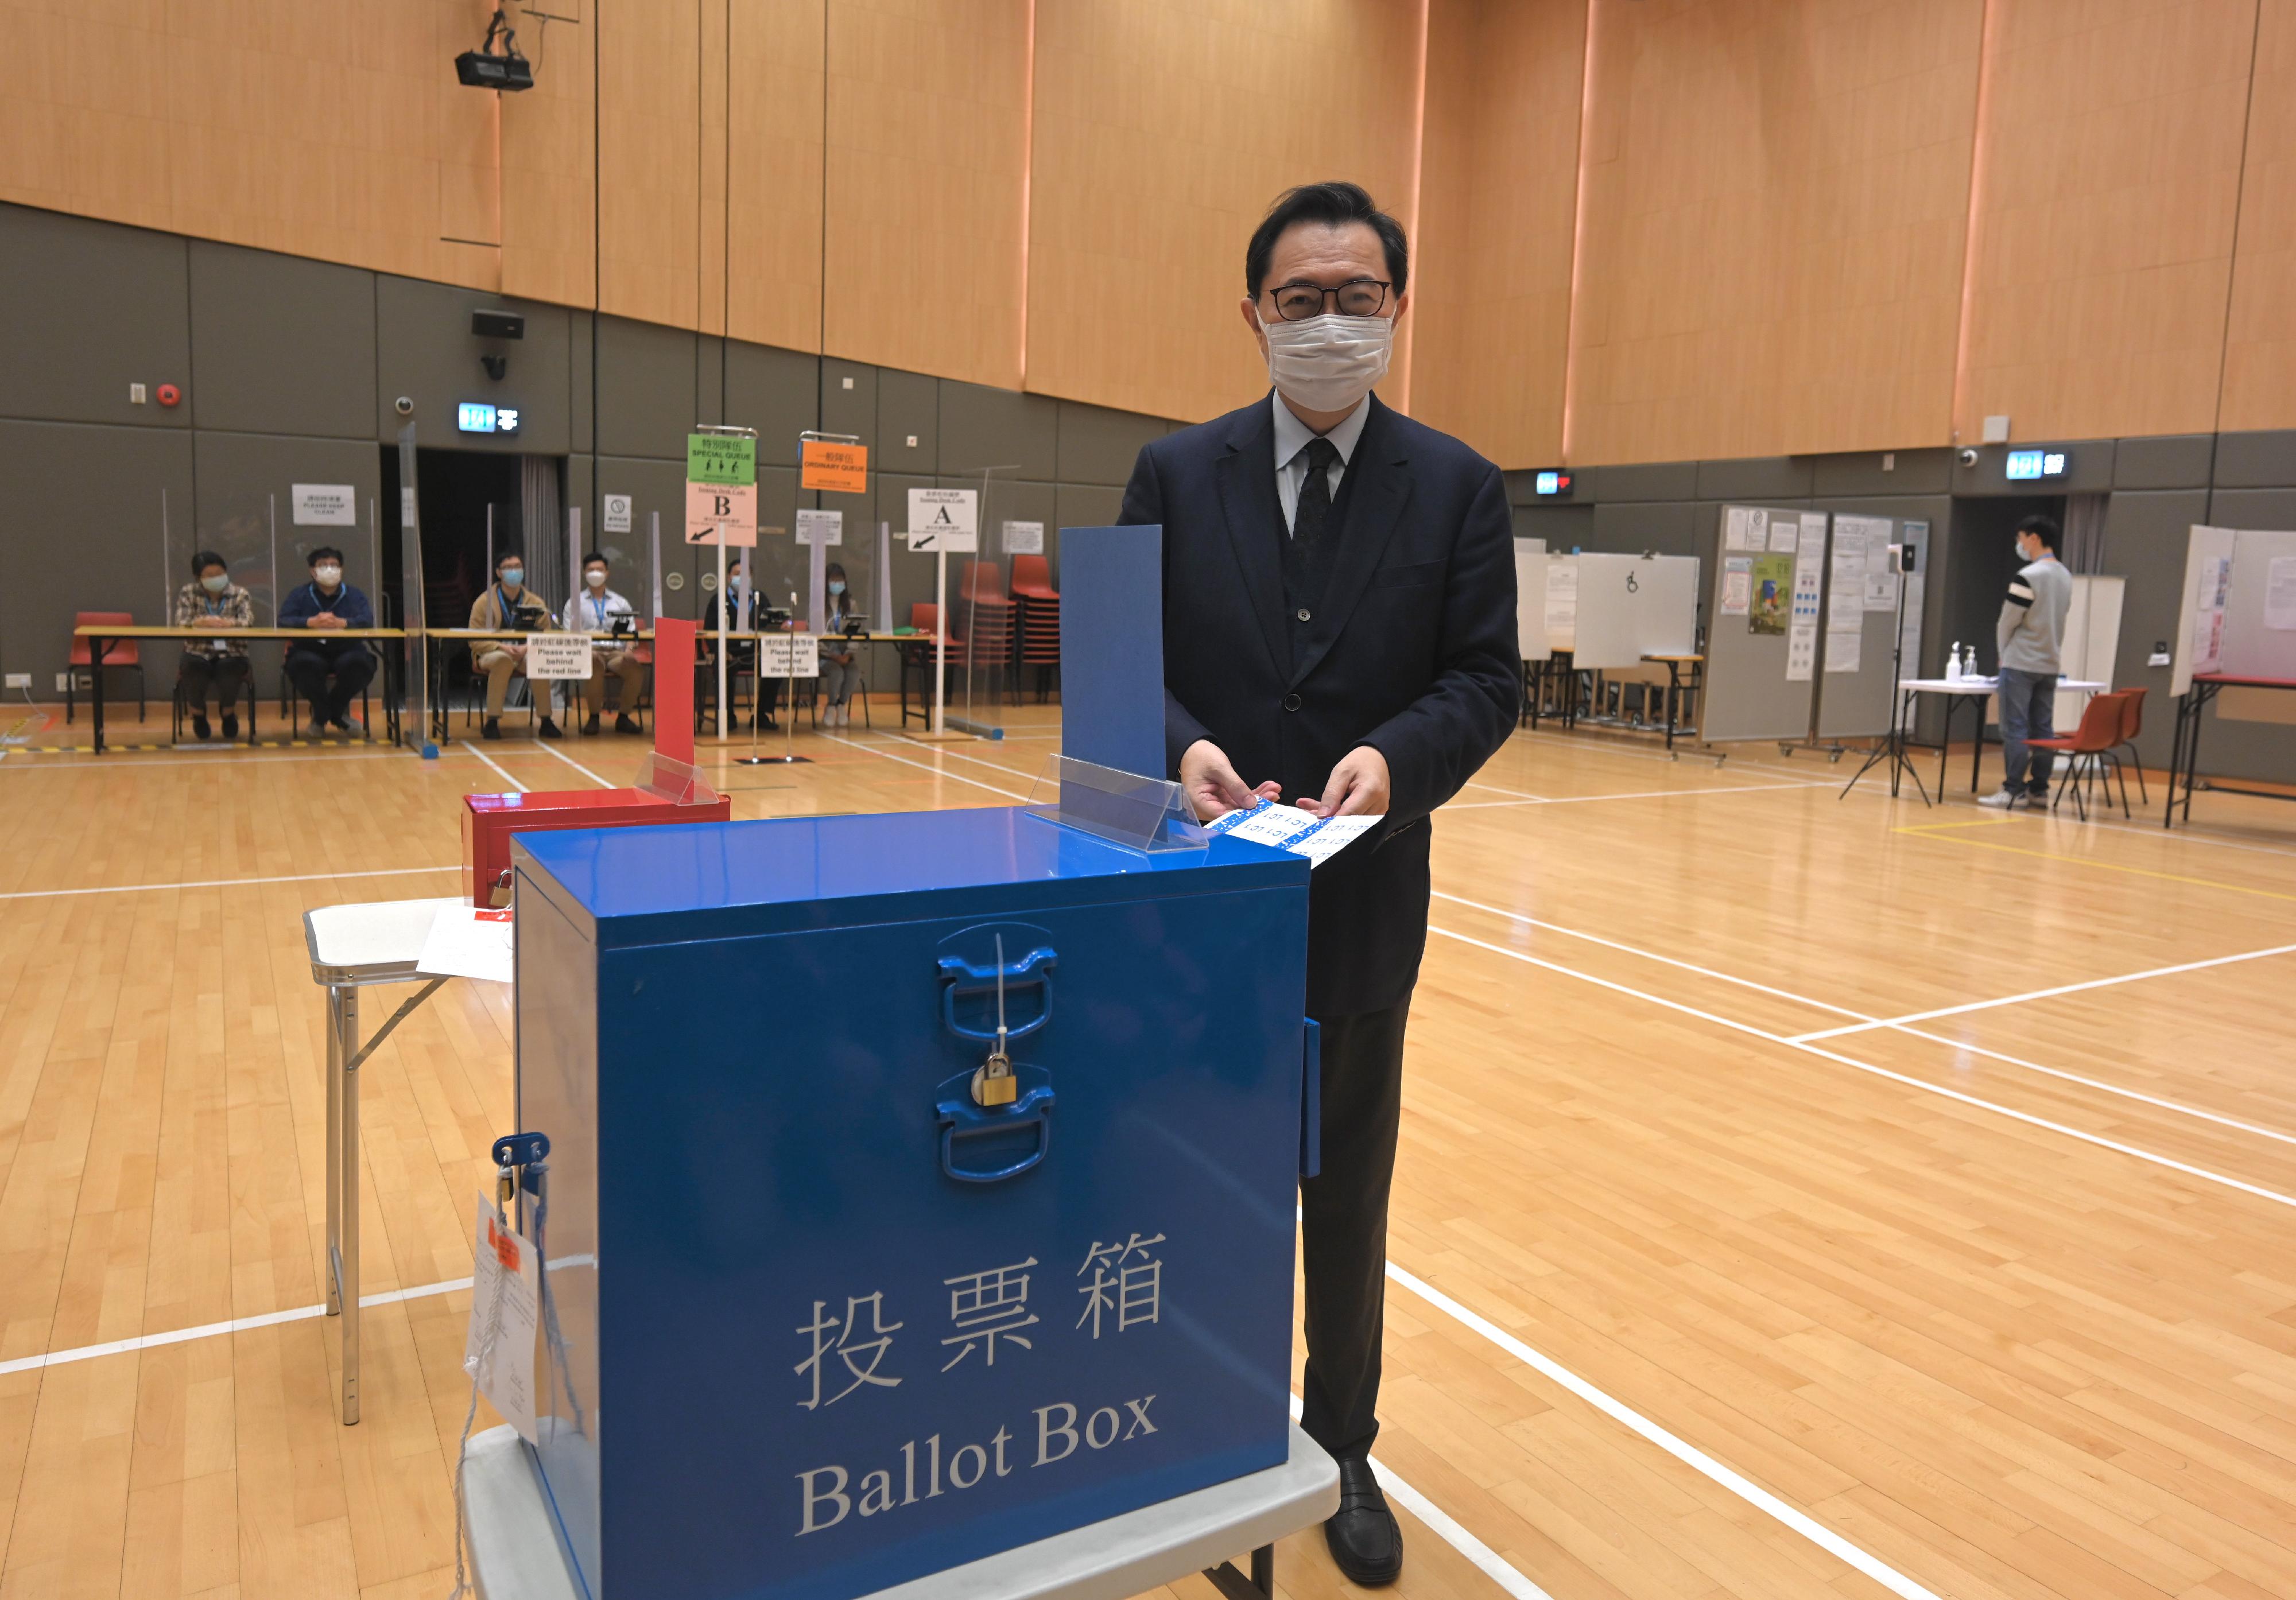 The Chairman of the Electoral Affairs Commission, Mr Justice Barnabas Fung Wah, demonstrates the proper procedure to cast votes in the Legislative Council General Election during his visit to a mock polling station at the North Point Community Hall today (December 14).